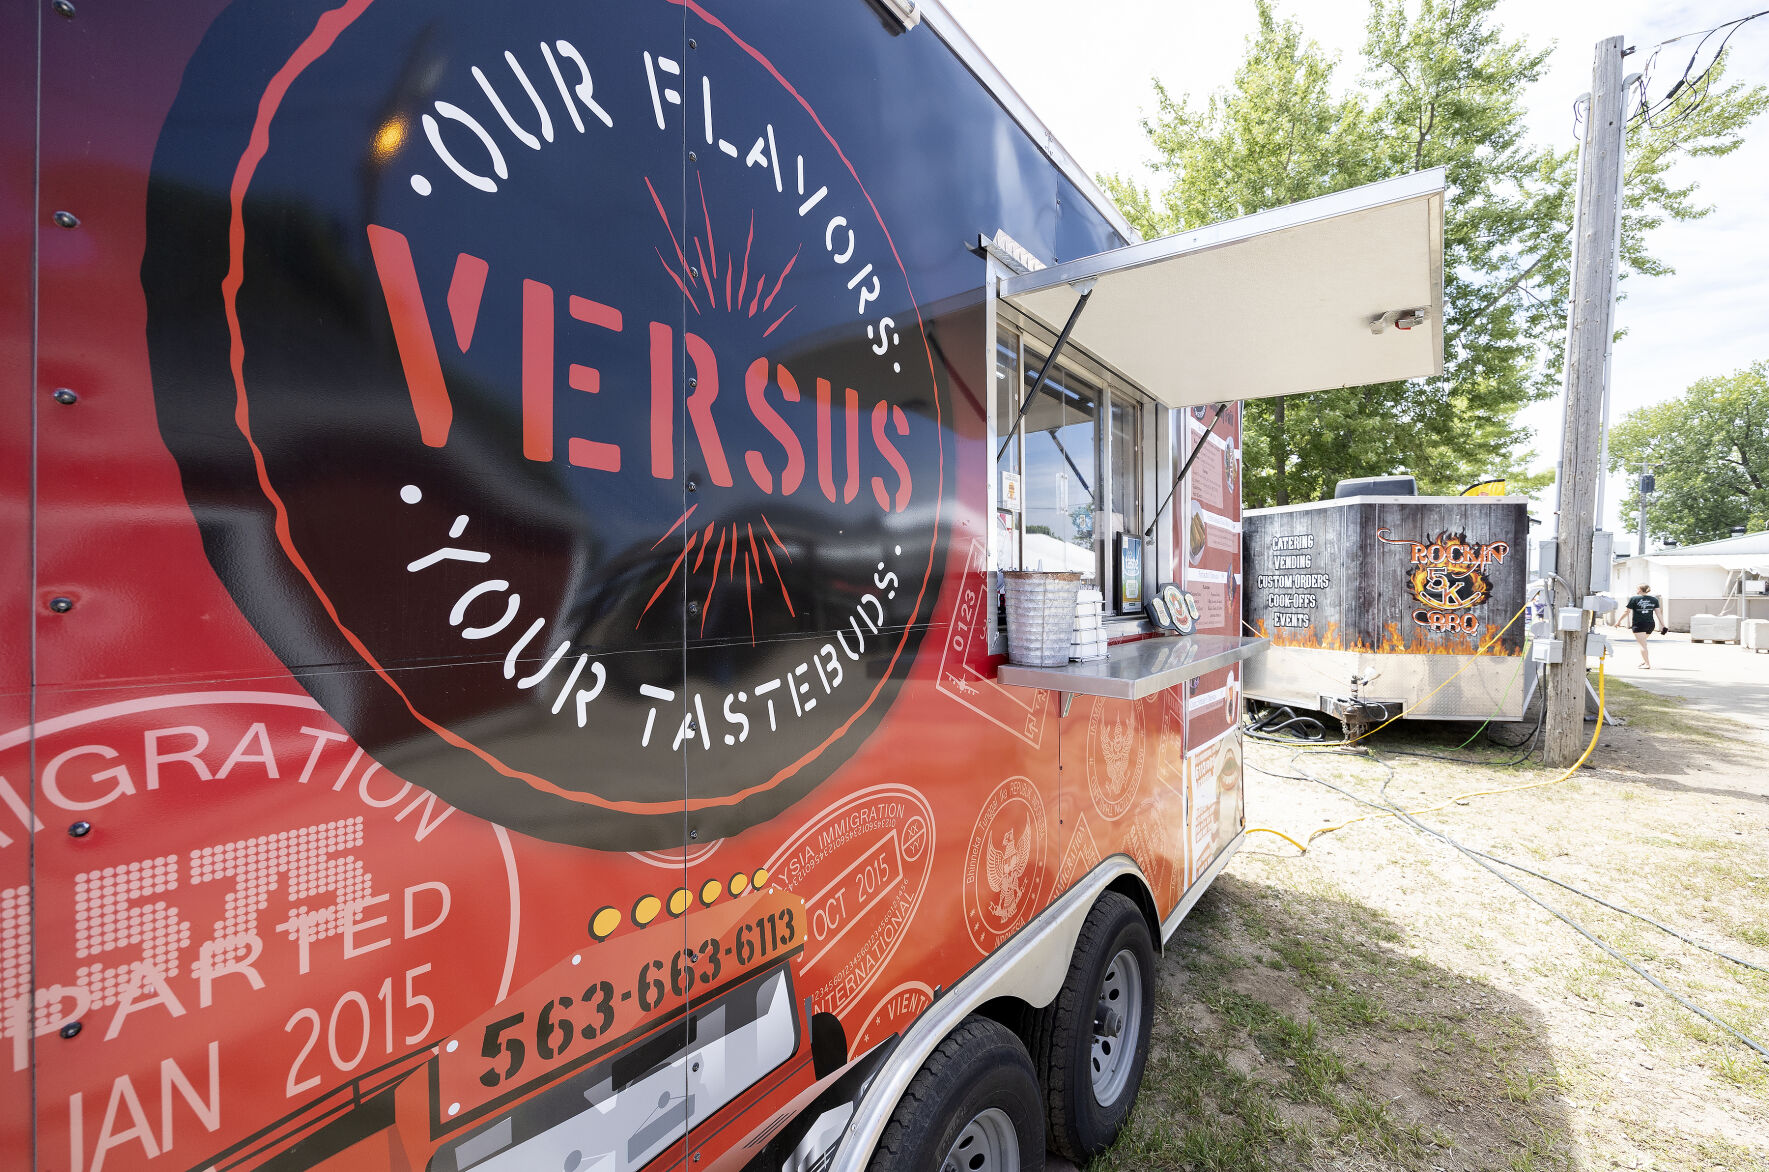 Versus food truck awaits hungry visitors during the Dubuque County Fair.    PHOTO CREDIT: File photo